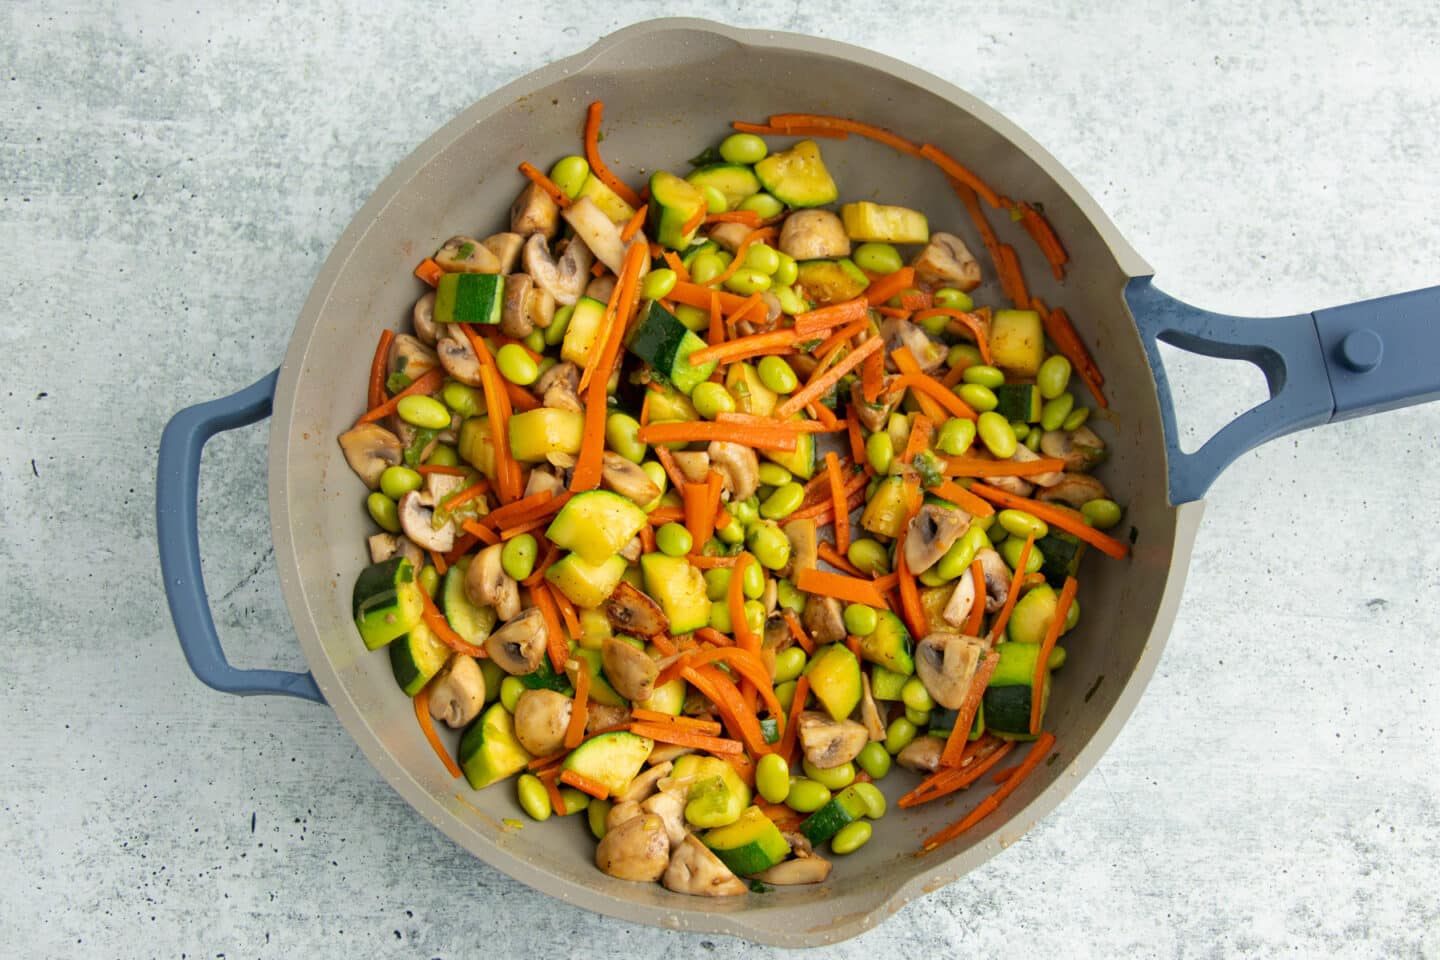 Picture of skillet with cooked vegetables and edamame added in.